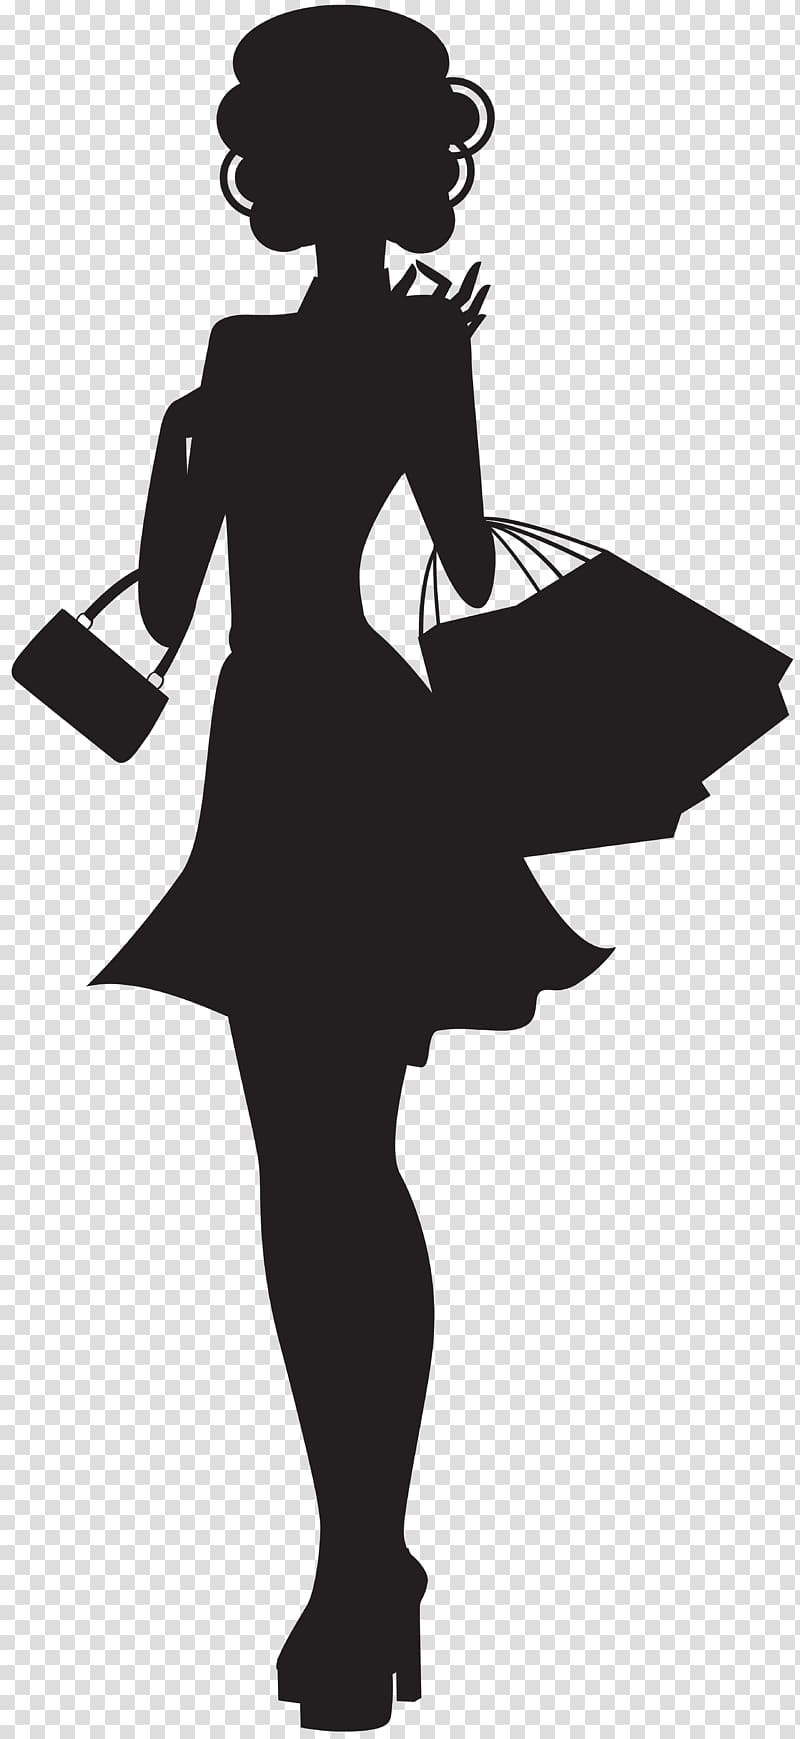 woman with shopping bags silhouette , Silhouette Woman , Shopping Woman Silhouette transparent background PNG clipart